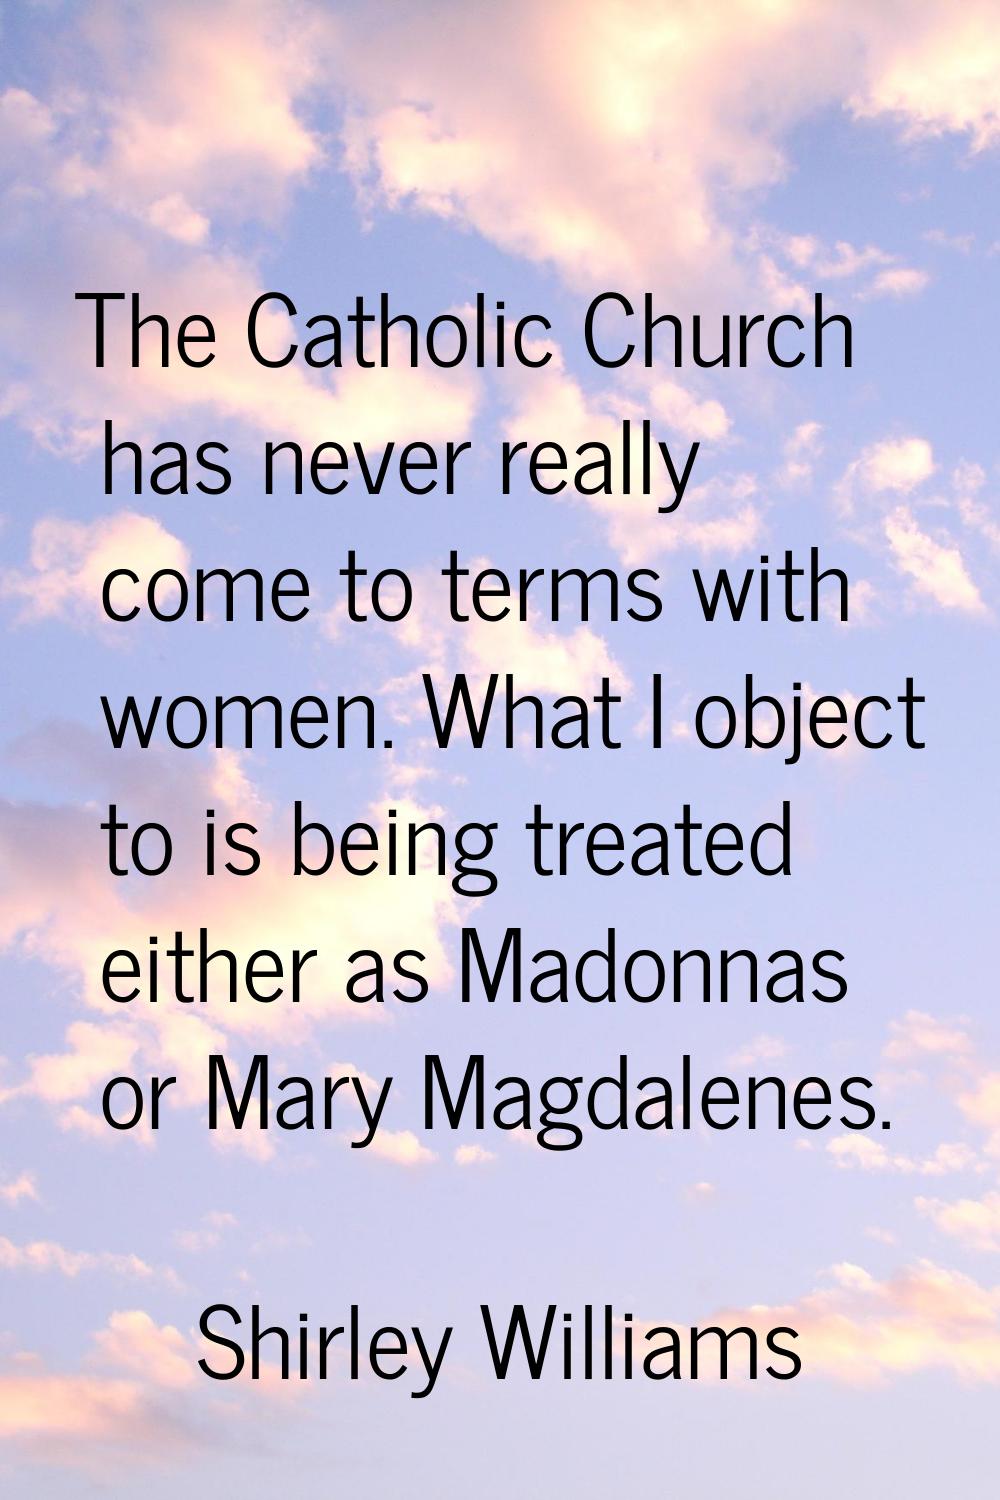 The Catholic Church has never really come to terms with women. What I object to is being treated ei